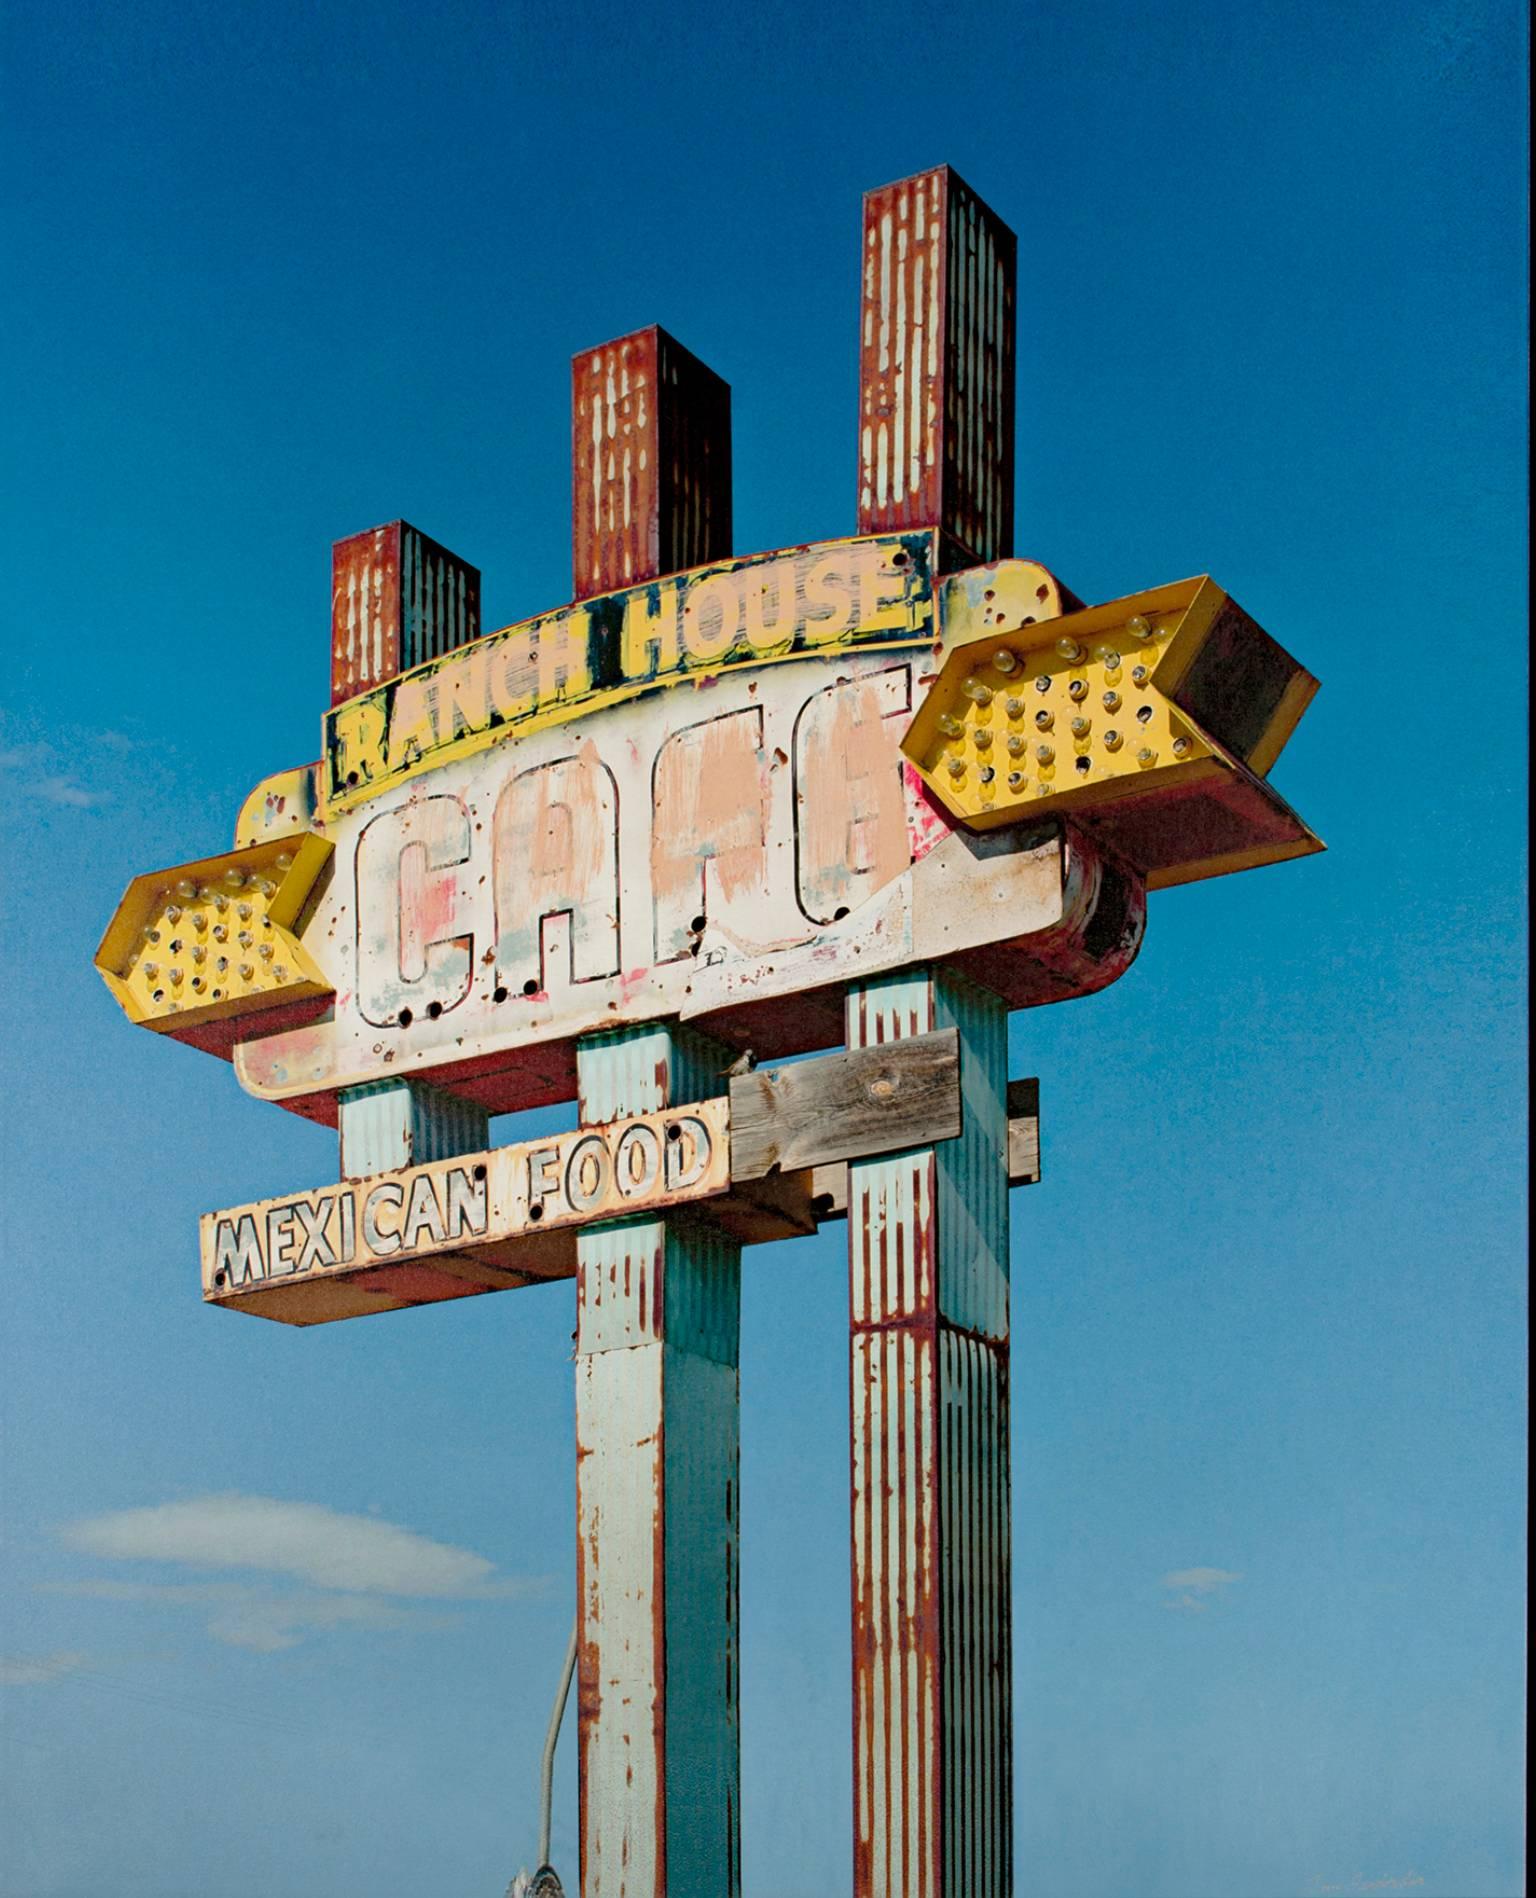 "Tucumcari Ranch House Cafe Sign, NM" is a color photograph printed on paper and signed lower right by the artist, Thomas Ferderbar. It depicts a large fading cafe sign against a bright blue sky. 

48" x 36" art
51 1/4" x 38 3/4" framed

Artist